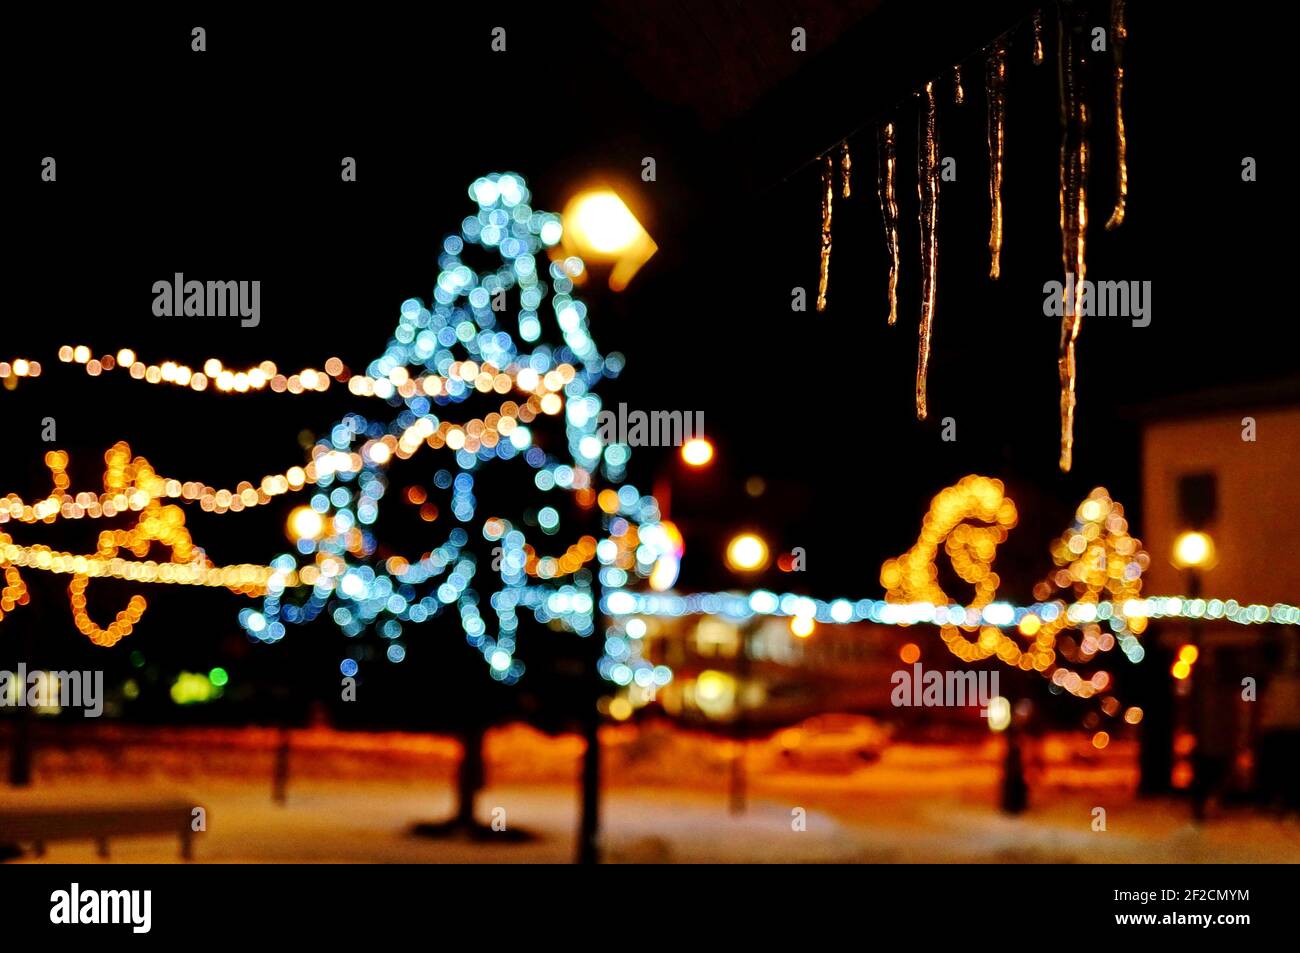 Picture of hanging icicles at night with blurred Christmas decoration in the background Stock Photo